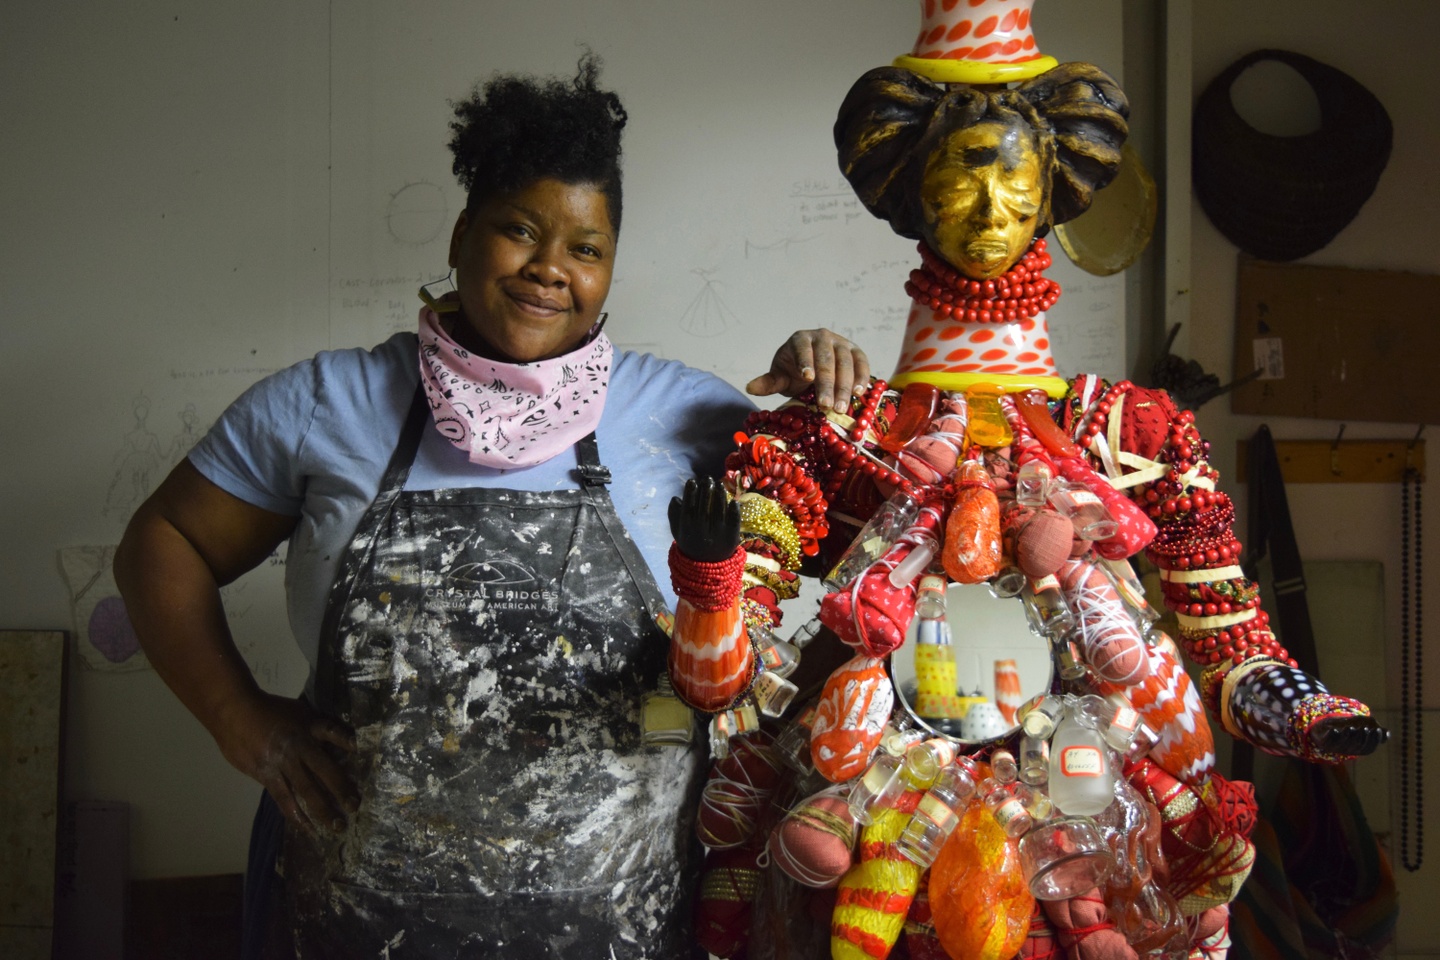 Vanessa German standing next to a sculptural figure of a person she has created with an assortment of materials—beads, jars, a small round mirror. The body of the figure is primarily red; the head is golden, with two large buns and a hat.